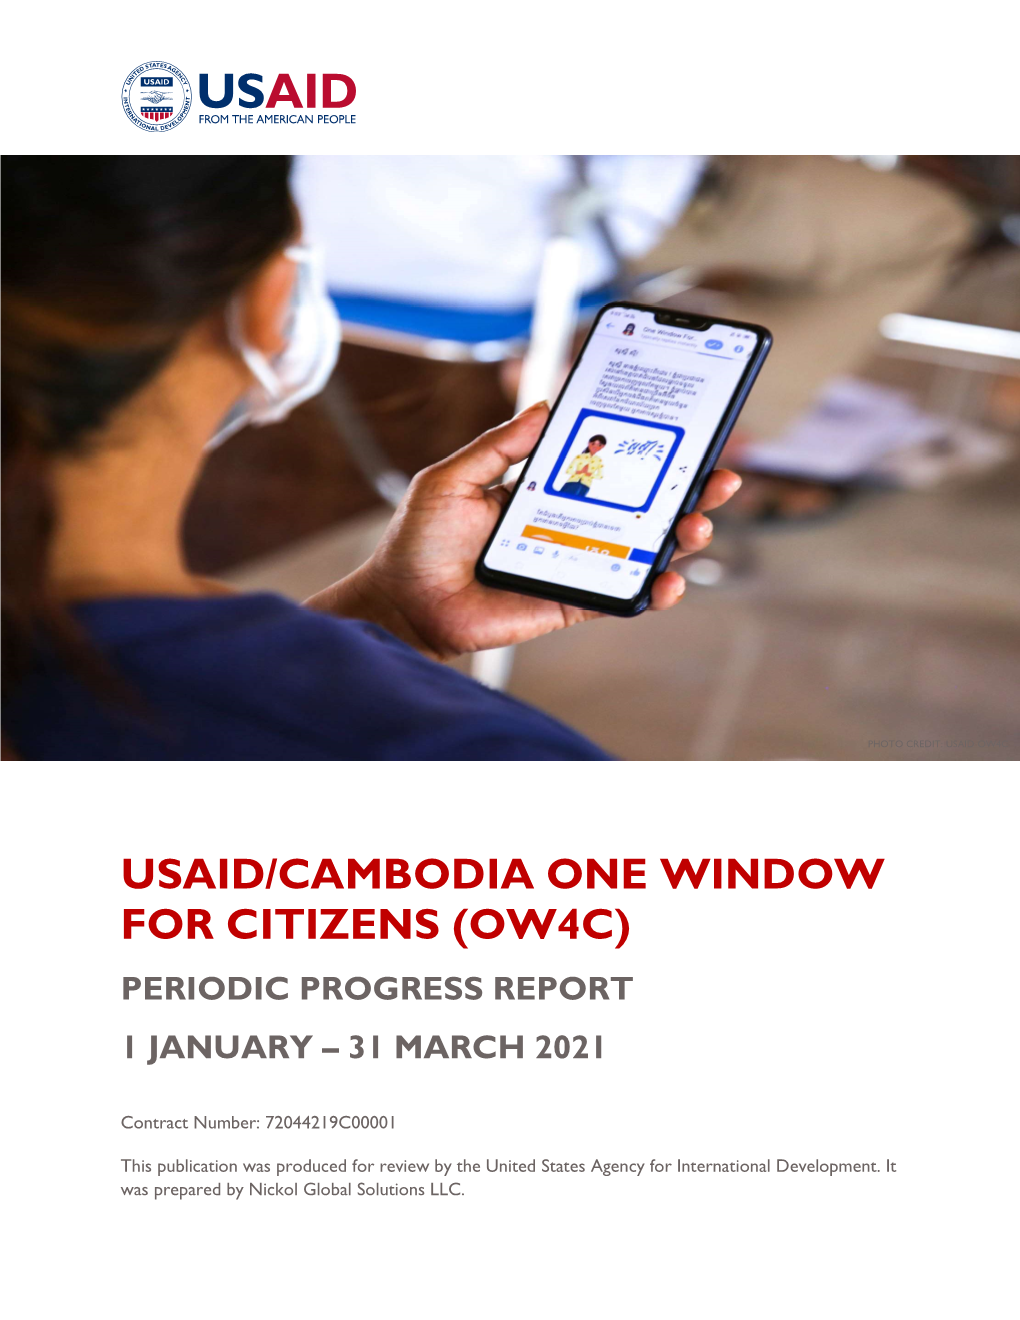 Usaid/Cambodia One Window for Citizens (Ow4c) Periodic Progress Report 1 January – 31 March 2021